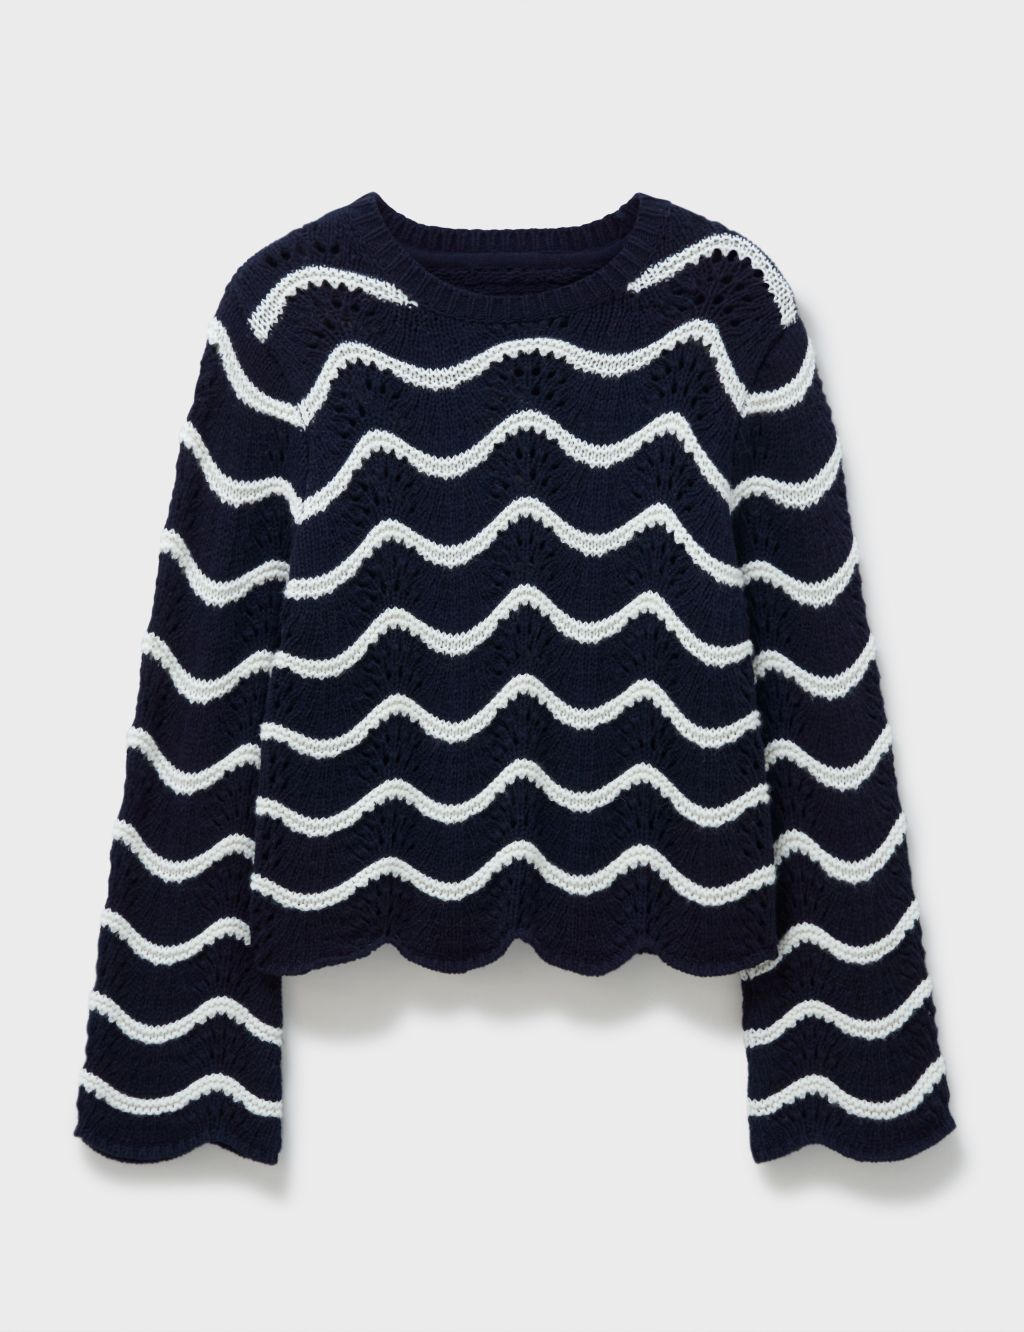 Lambswool Rich Striped Crew Neck Jumper image 2